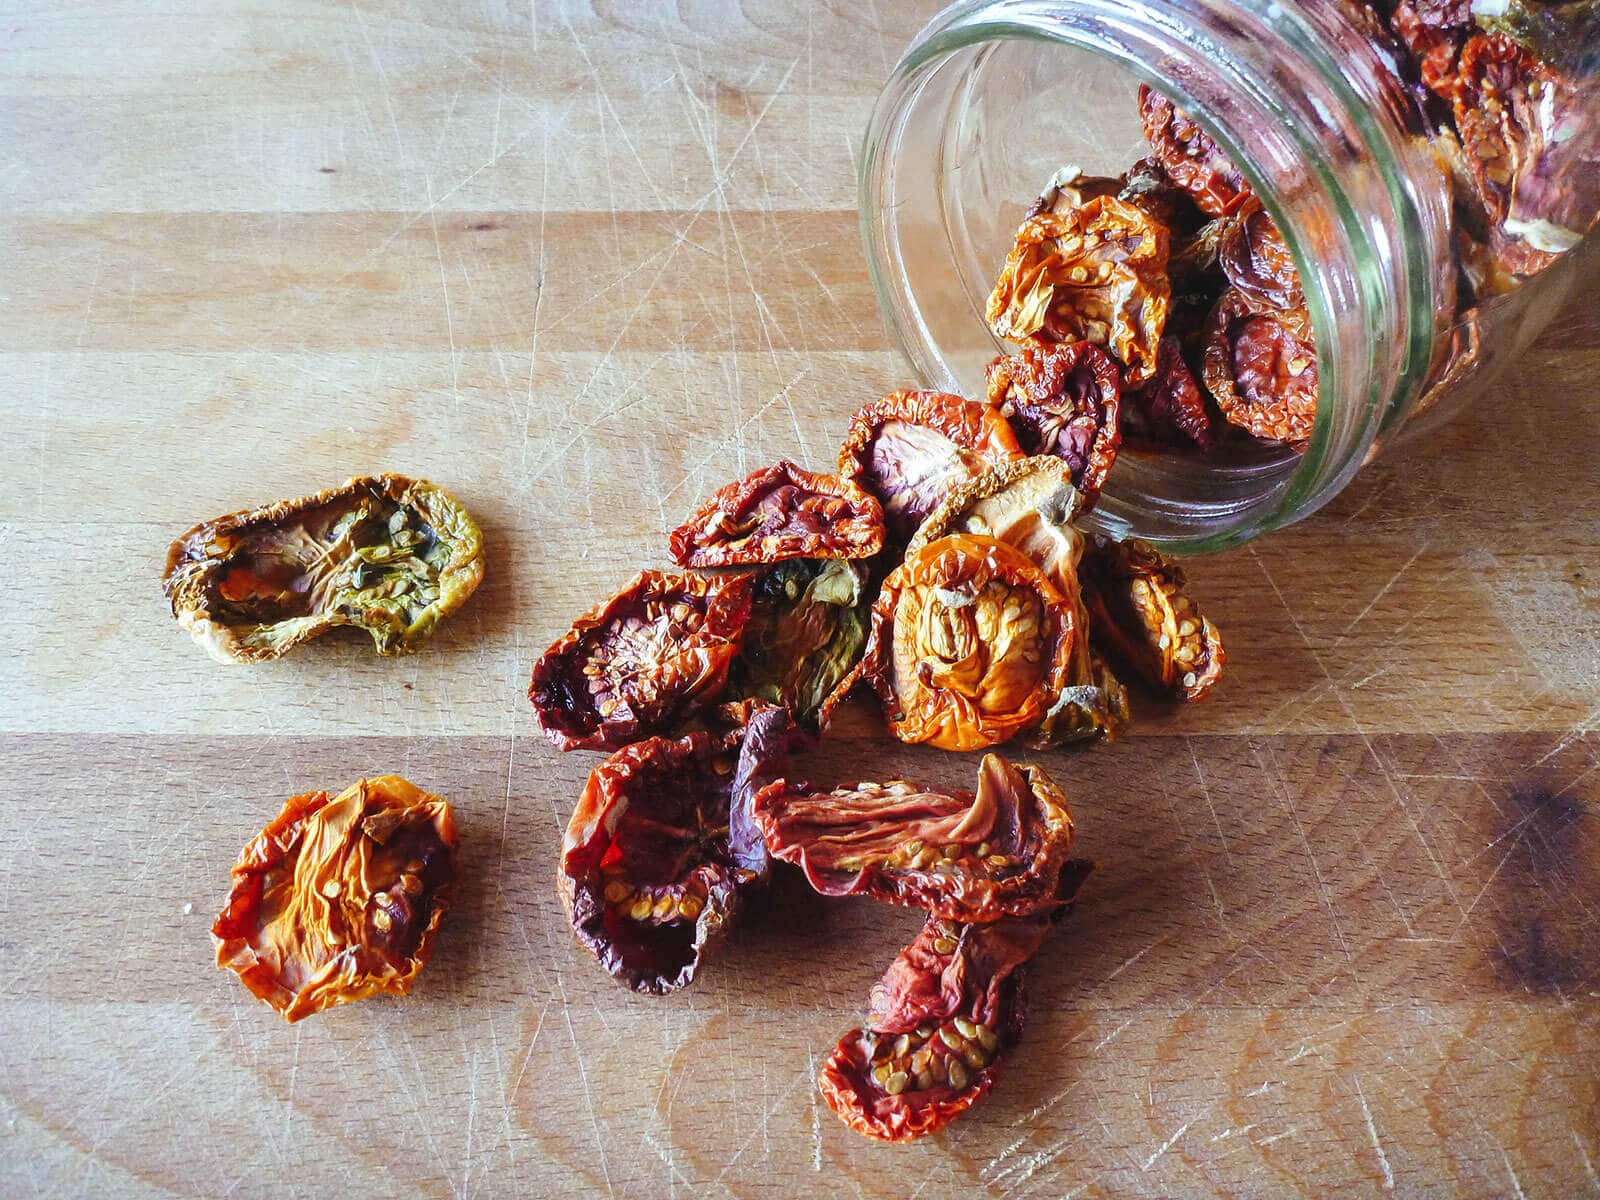 Colorful oven-dried tomatoes spilling out of a glass jar on a butcher block